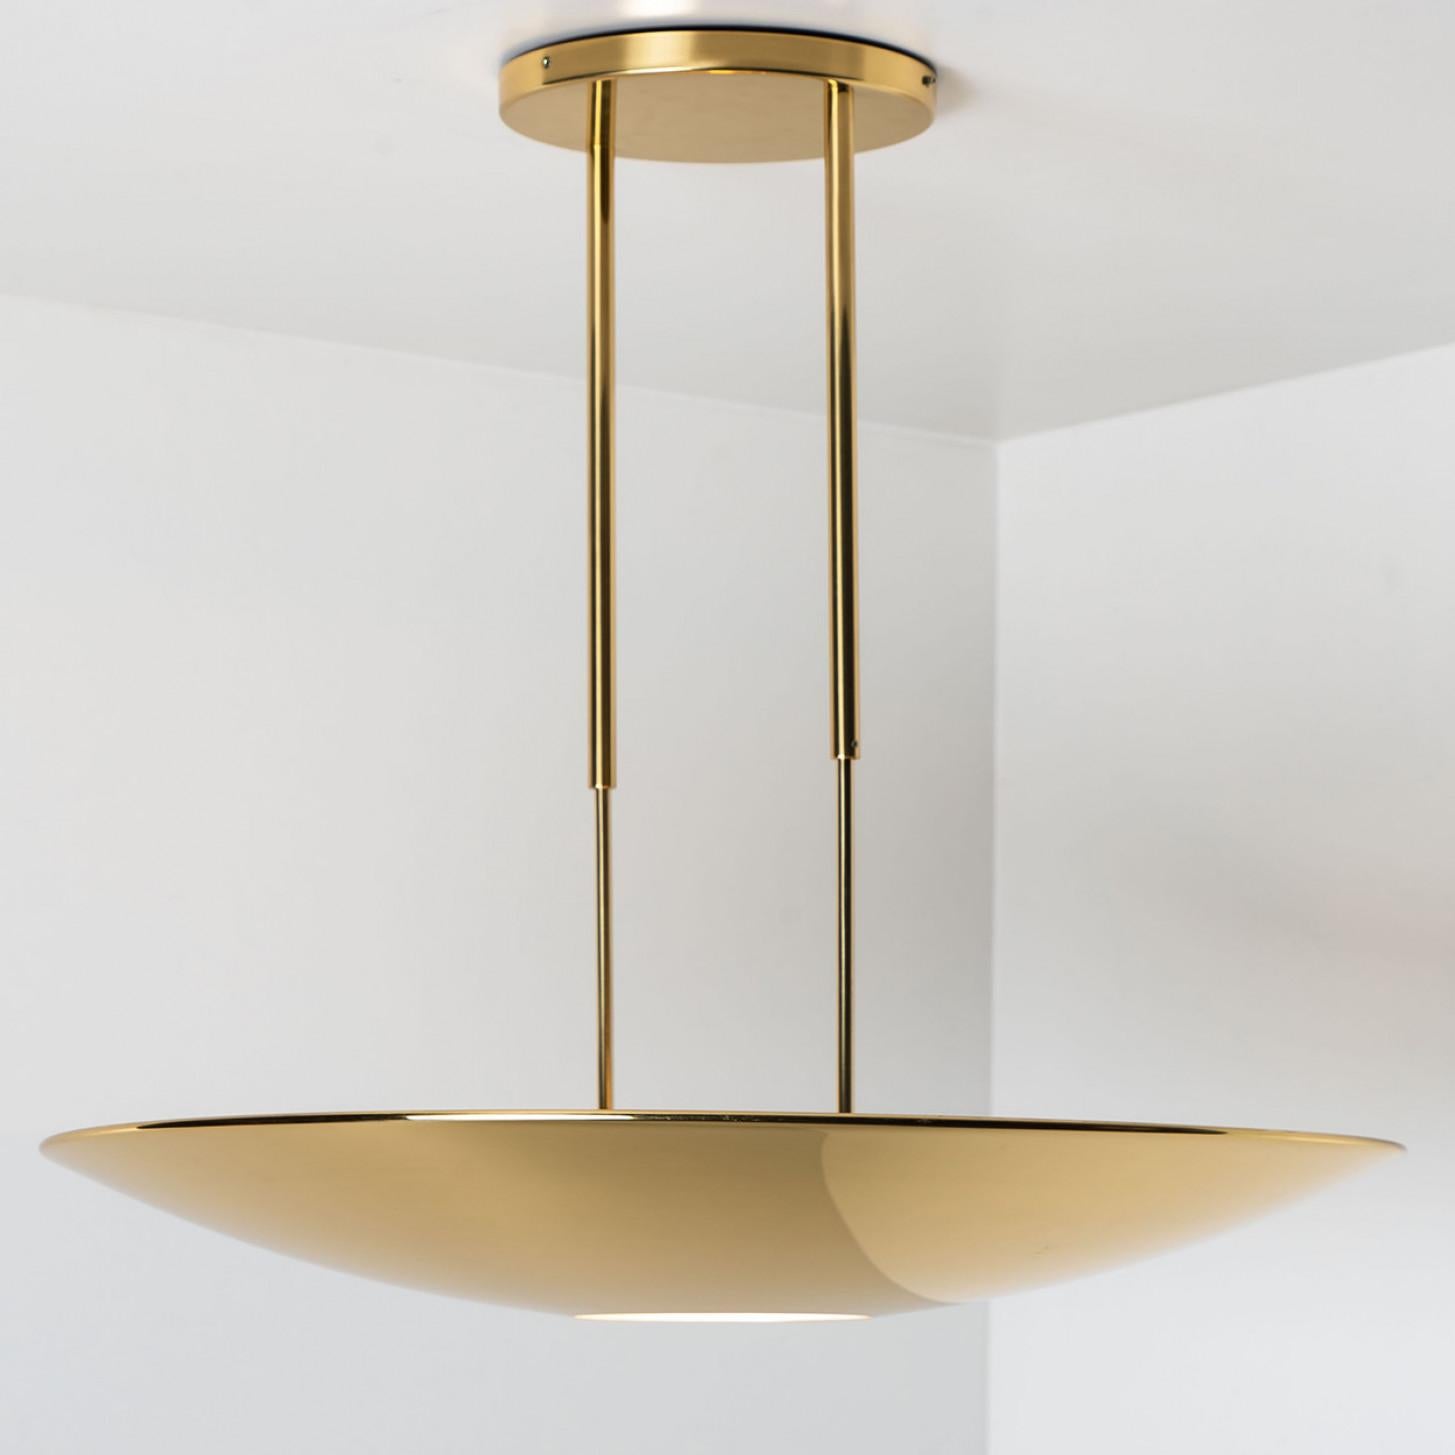 High quality brass pendant lamp or ceiling fixture 'Sola 80' by Florian Schulz. The light has an opening at the bottom for a round diffuser out of glass. It is 90 cm in diameter and radiates a direct and an indirect lighting.
The light is adjustable